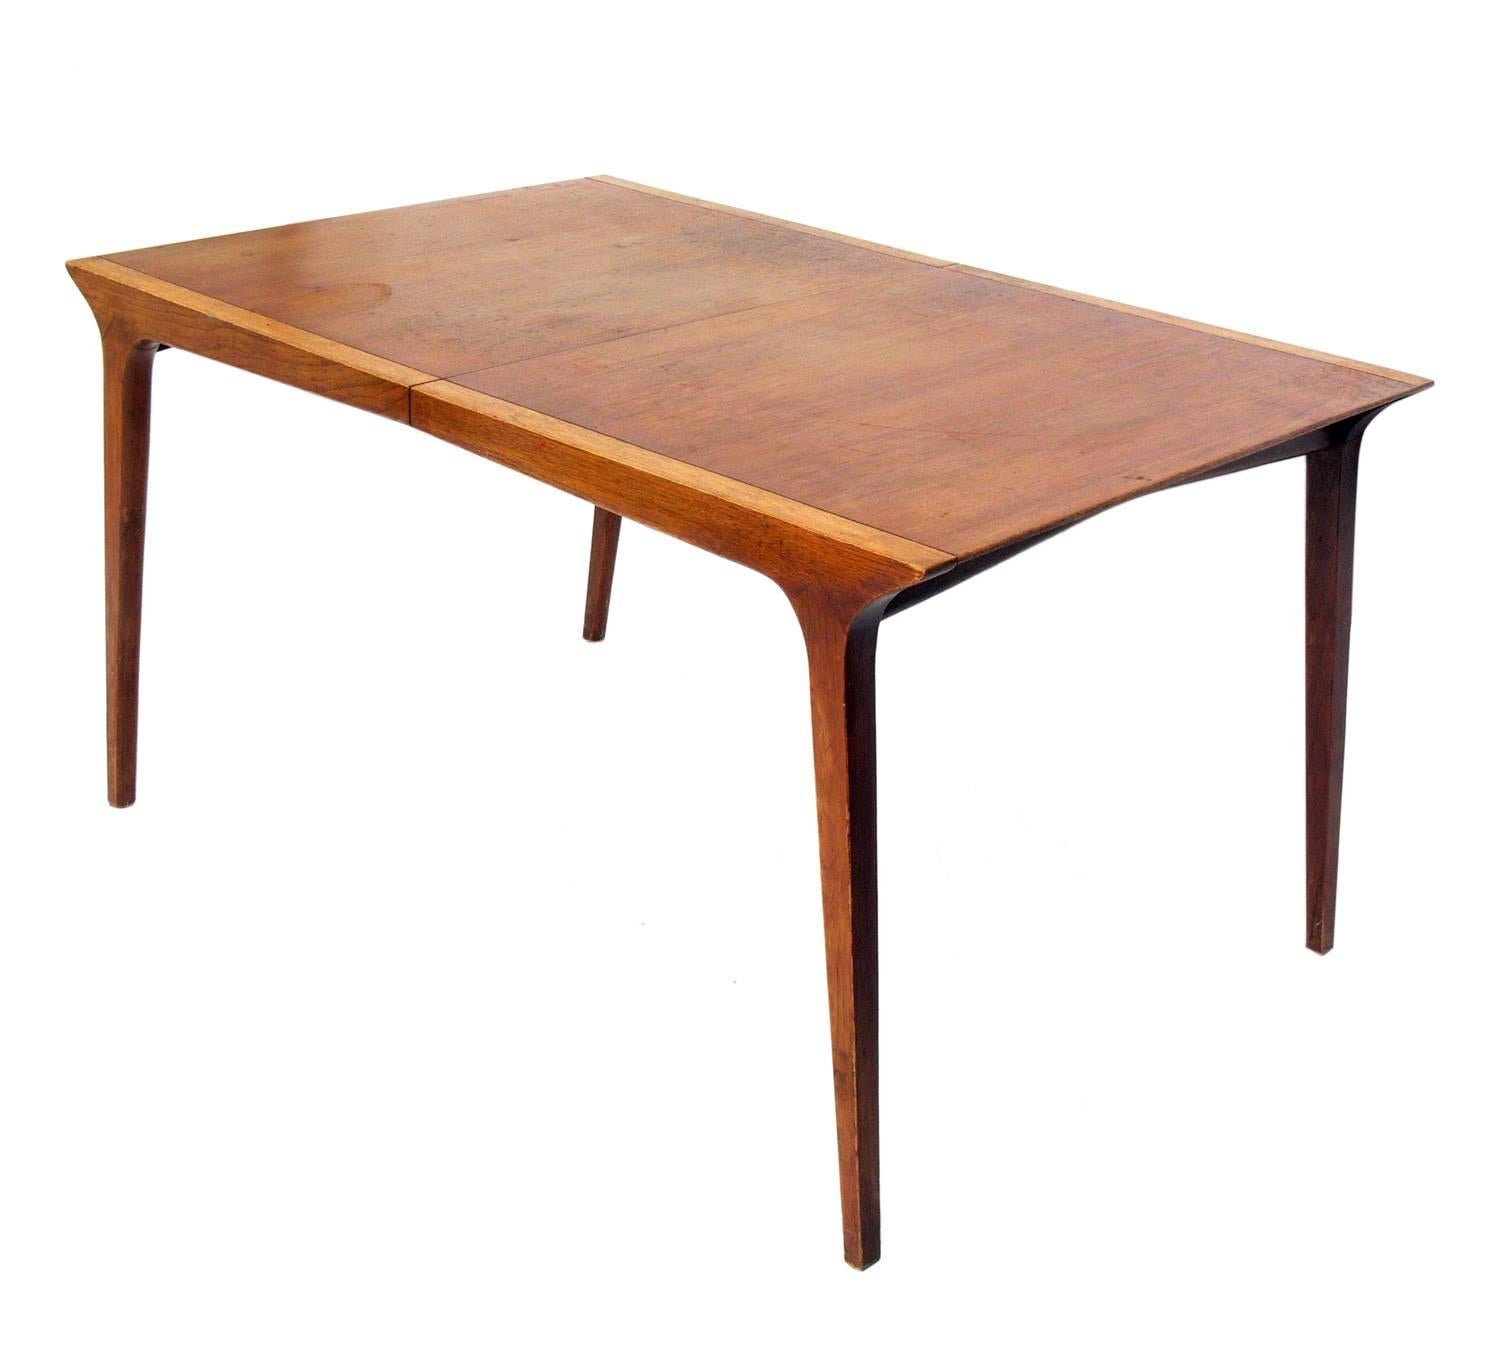 Mid-Century Modern dining table, designed by John Van Koert for Drexel, American, circa 1950s. This table is currently being refinished and can be completed in your choice of finish color. The price noted below INCLUDES refinishing. The table